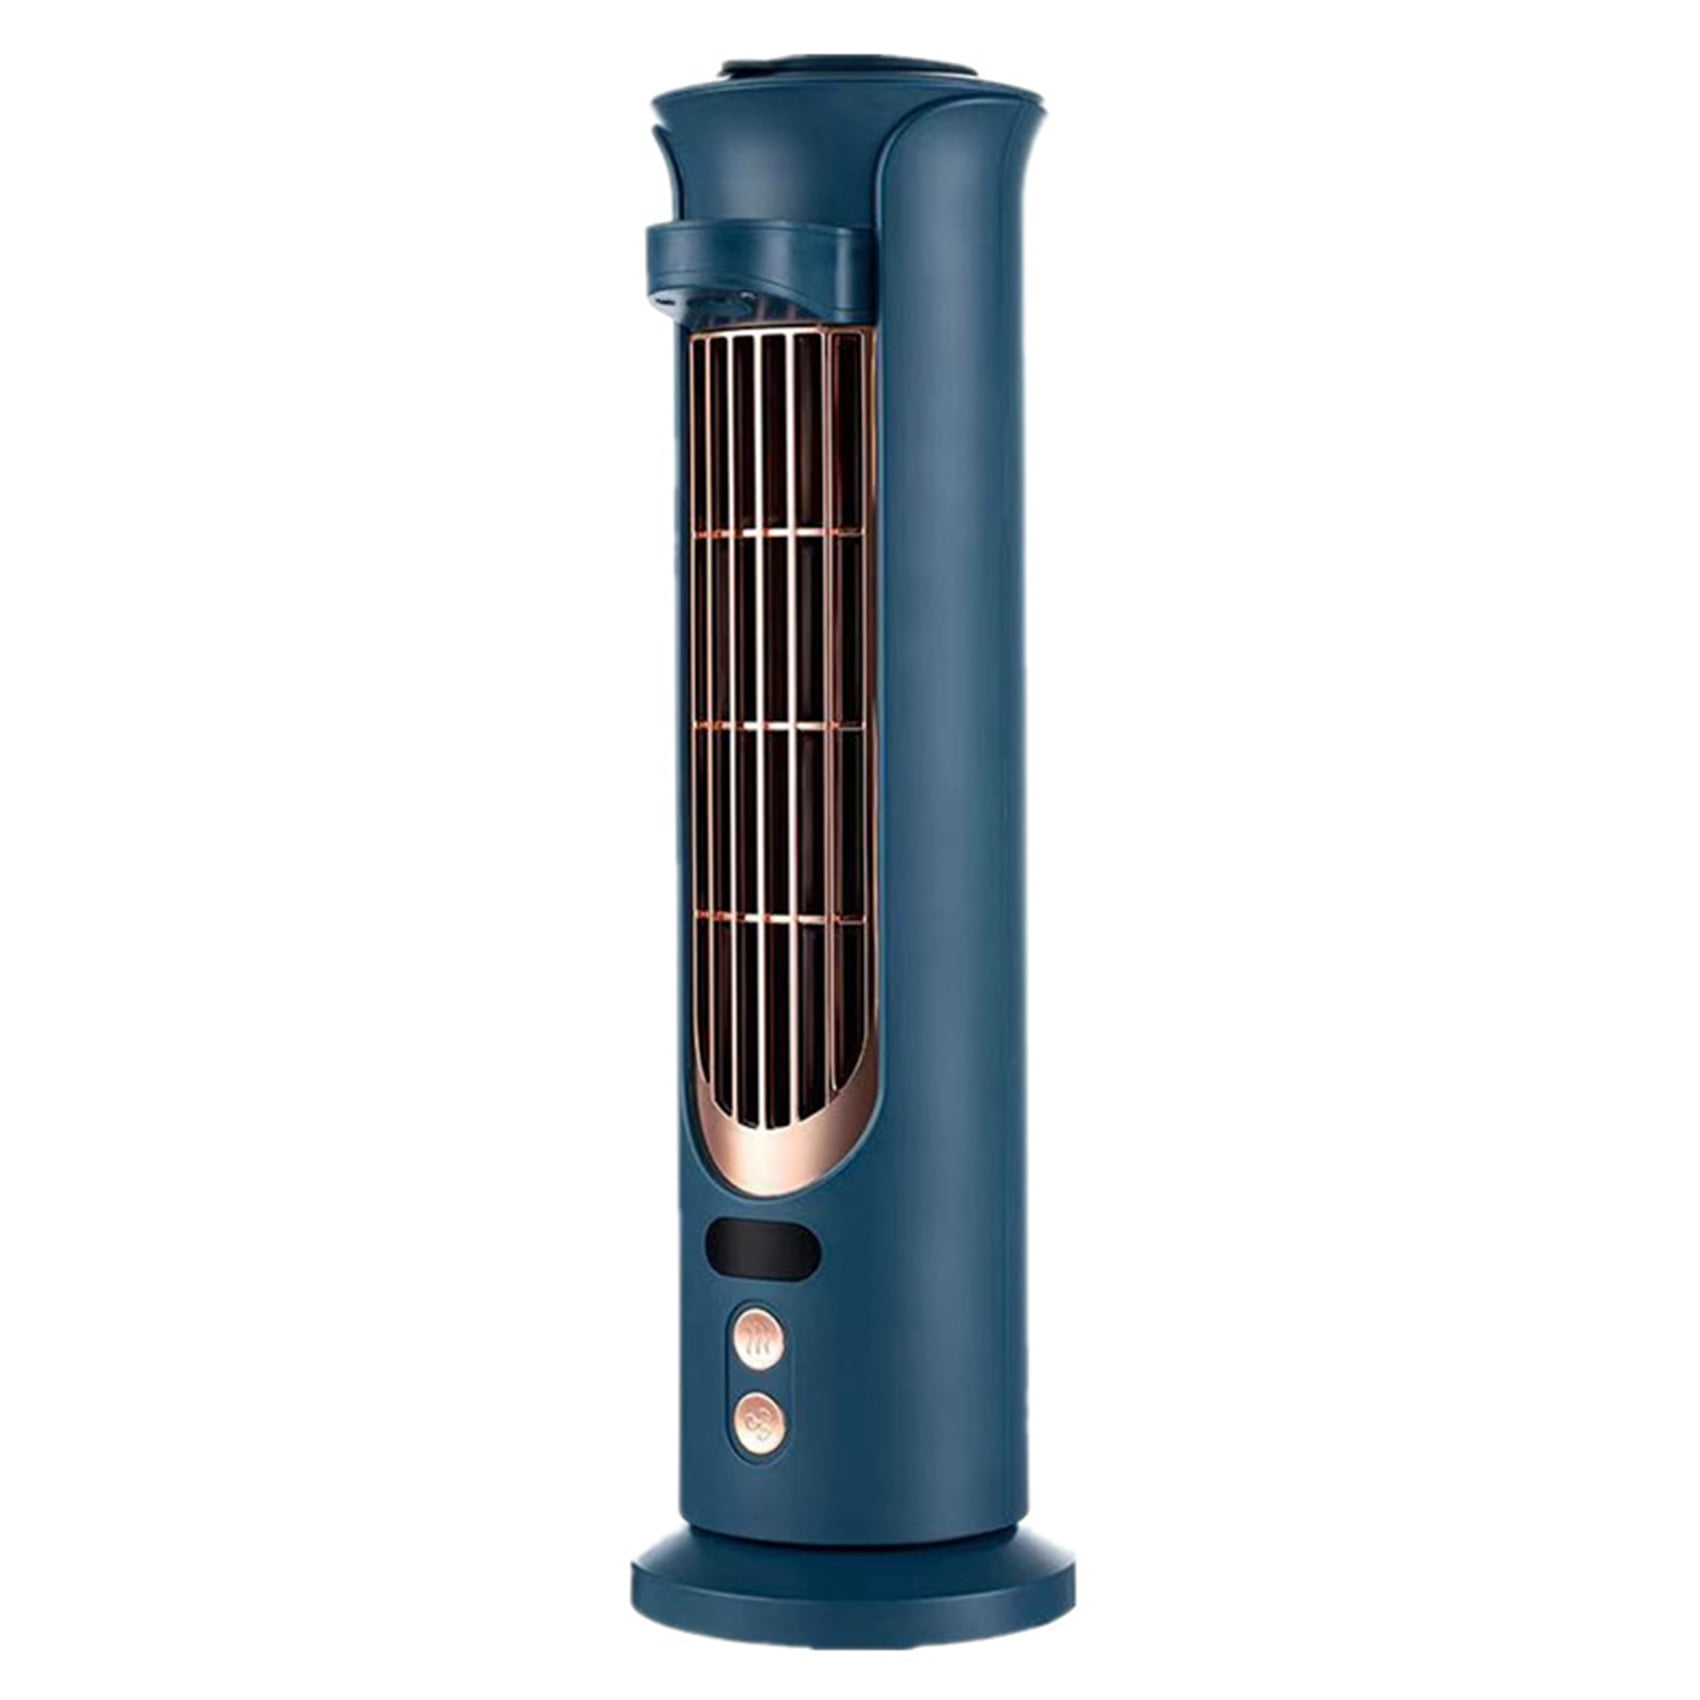 New Mini Portable USB Cooling Air Conditioner Purifier Tower Bladeless Desk Fan Tower Fan for Bedroom